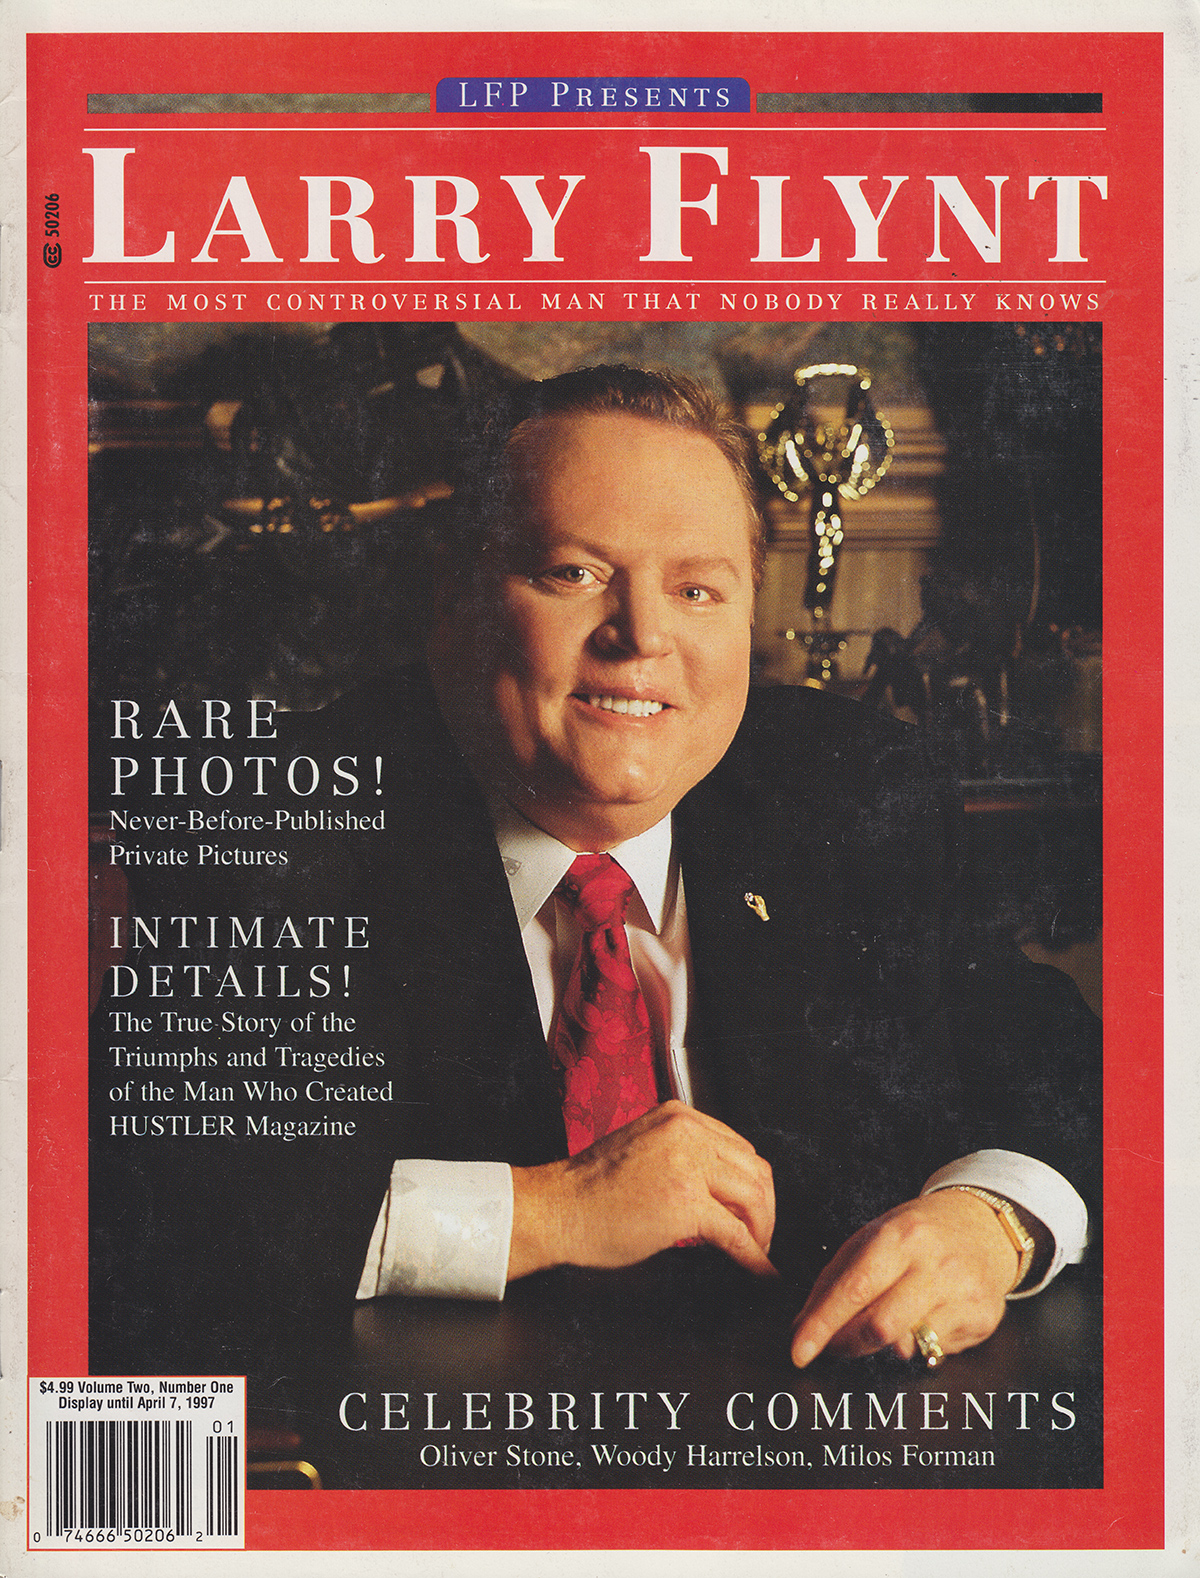 LFP Presents Larry Flynt magazine back issue LFP Presents magizine back copy LFP Presents Larry Flynt Adult Pornographic Magazine Back Issue Published by LFP, Larry Flynt Publications. Covergirl & Centerfold Larry Flynt Photographed by Clive McLean (Not Nude) .